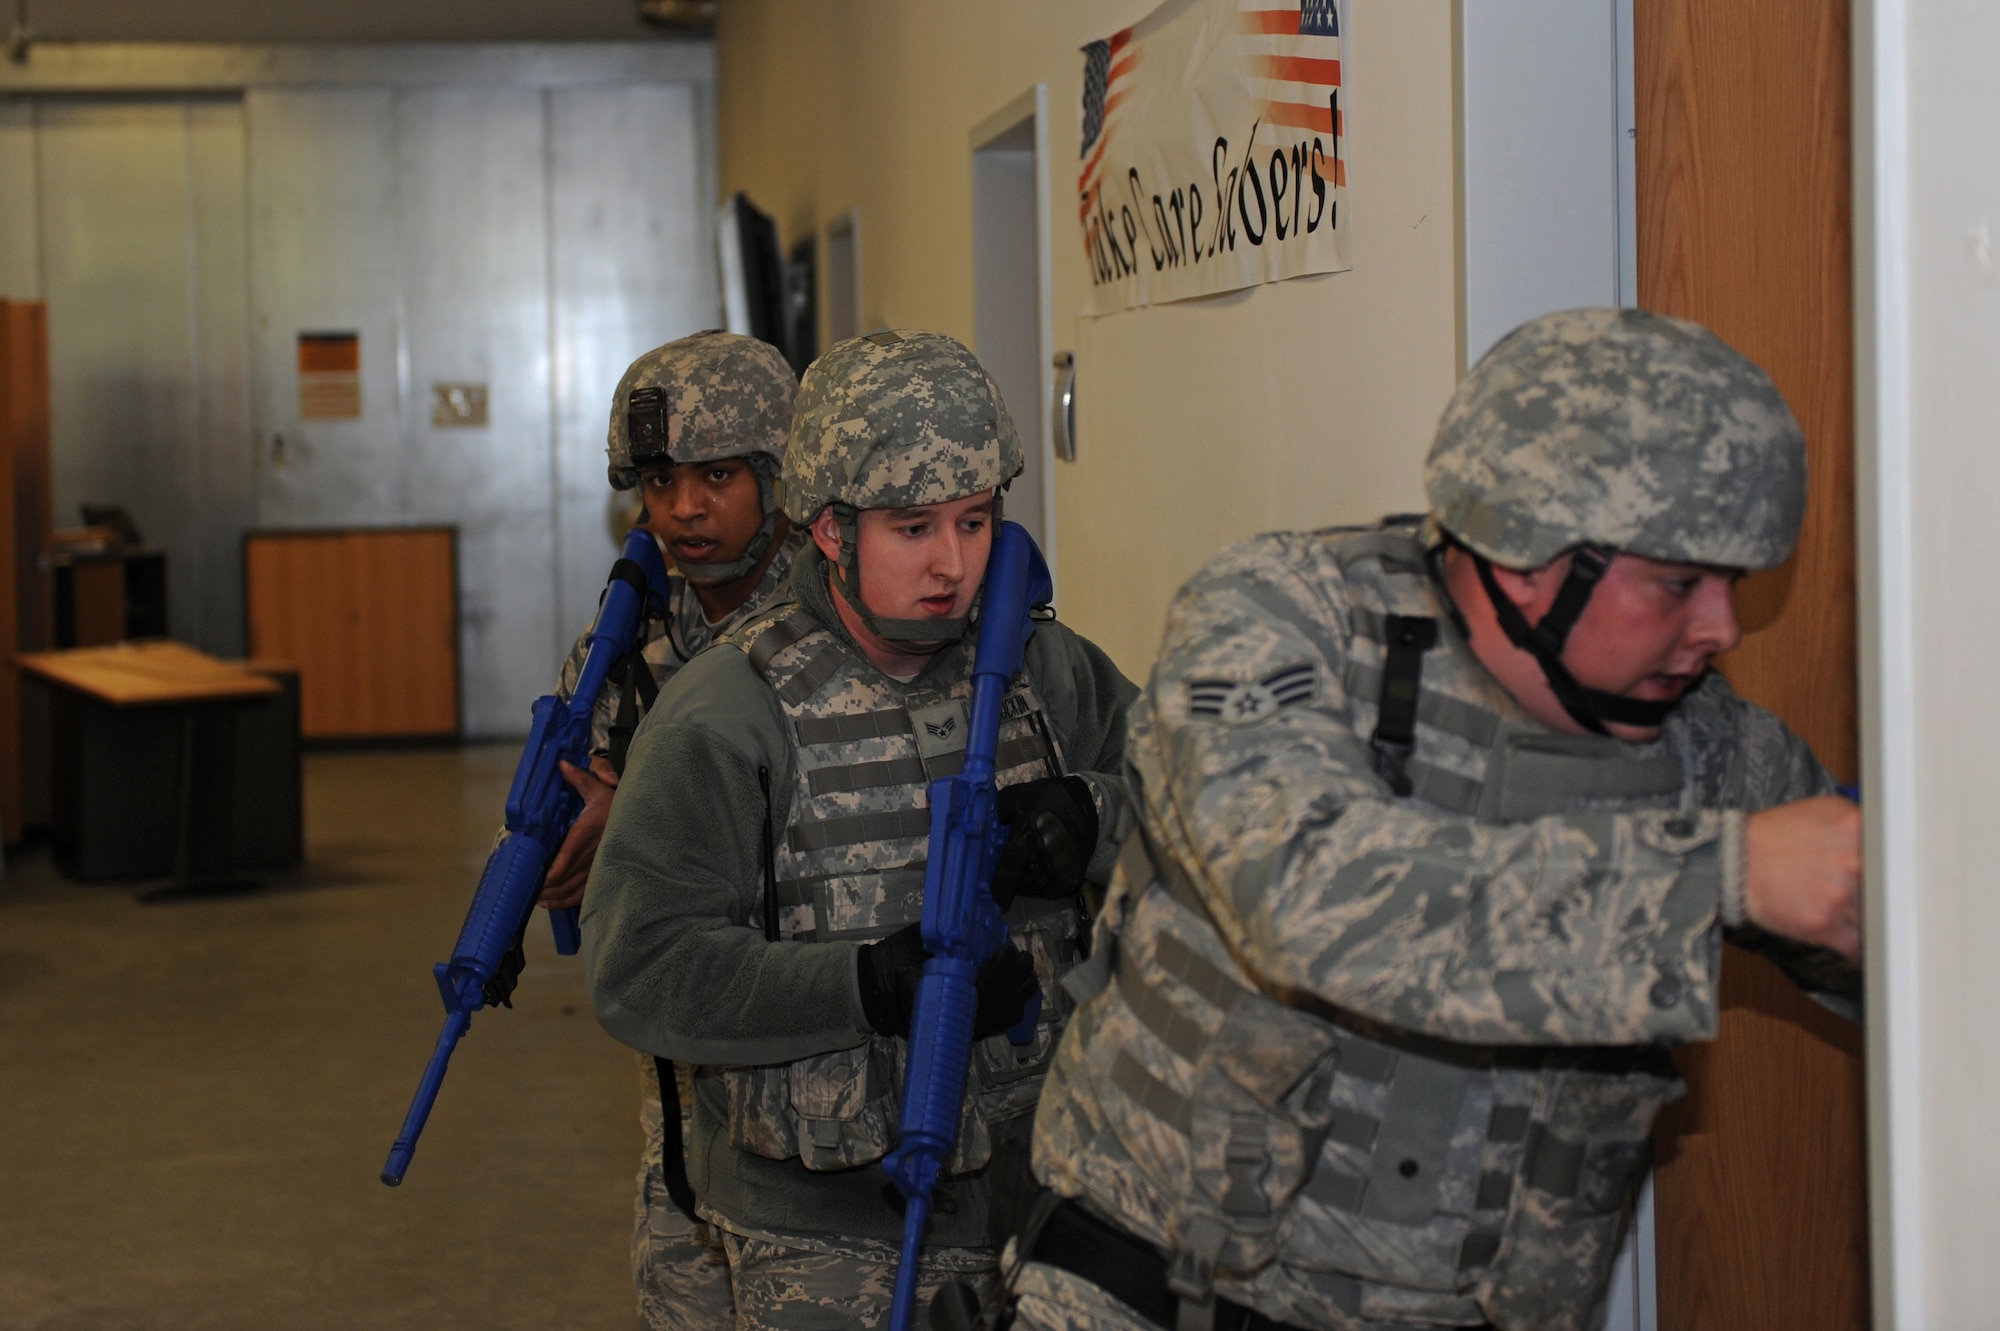 SPANGDAHLEM AIR BASE, Germany – Airmen from the 52nd Security Forces Squadron rush into a room to search for a shooter during an active-shooter training exercise at Bldg. 103 here Feb. 17. The 52nd Fighter Wing conducted the exercise to test the wing’s response to an active-shooter situation. Training like this readies the base to respond to real emergency events protecting base members and U.S. government assets. (U.S. Air Force photo by Airman 1st Class Matthew B. Fredericks/Released)